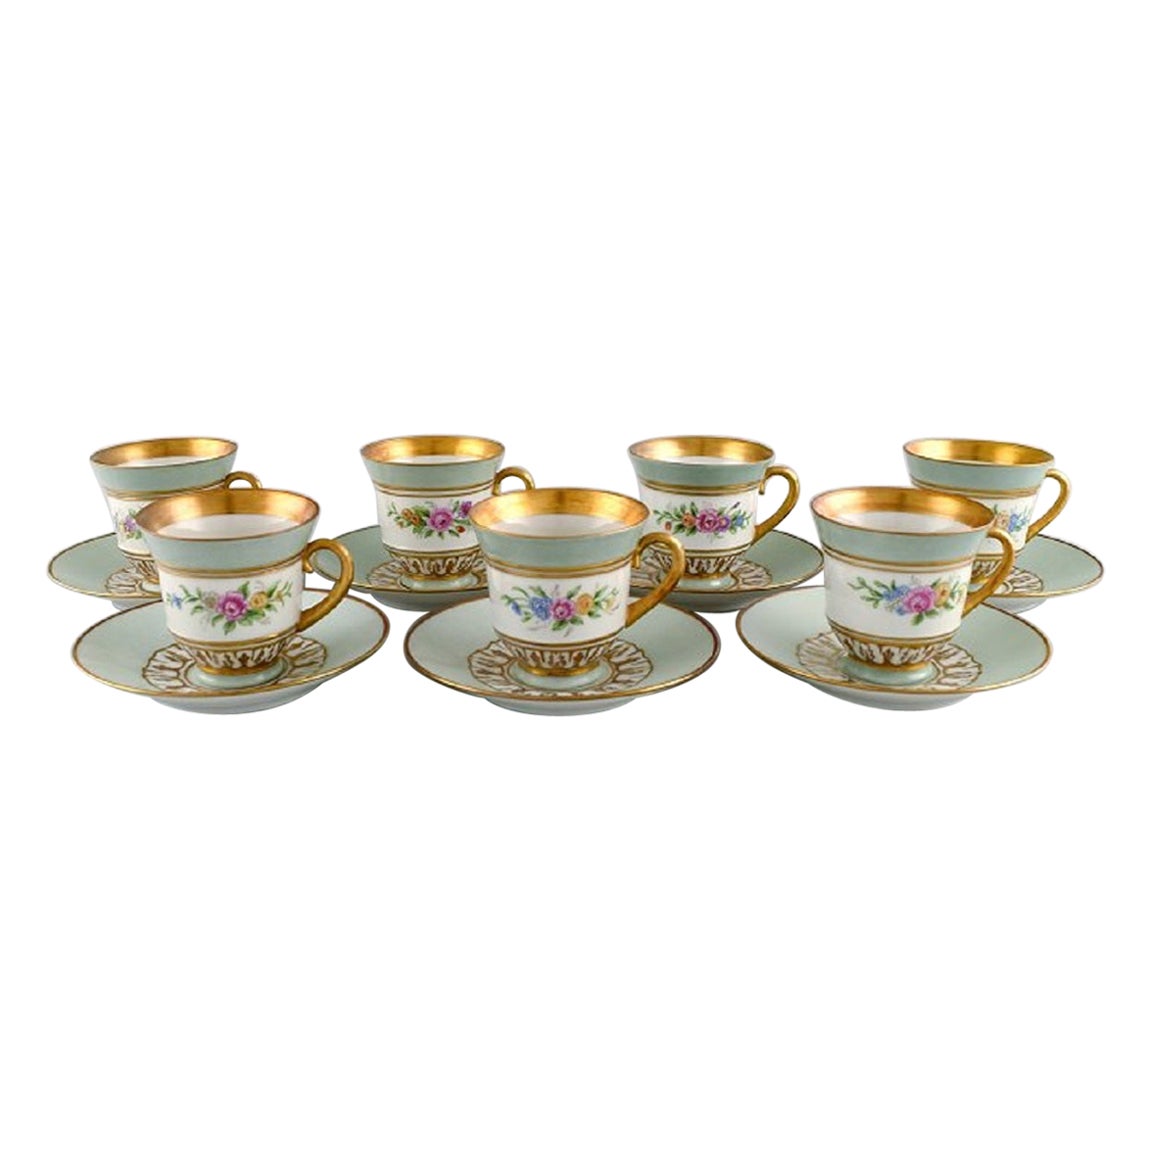 Seven Bing & Grøndahl Coffee Cups with Saucers, 1960s For Sale